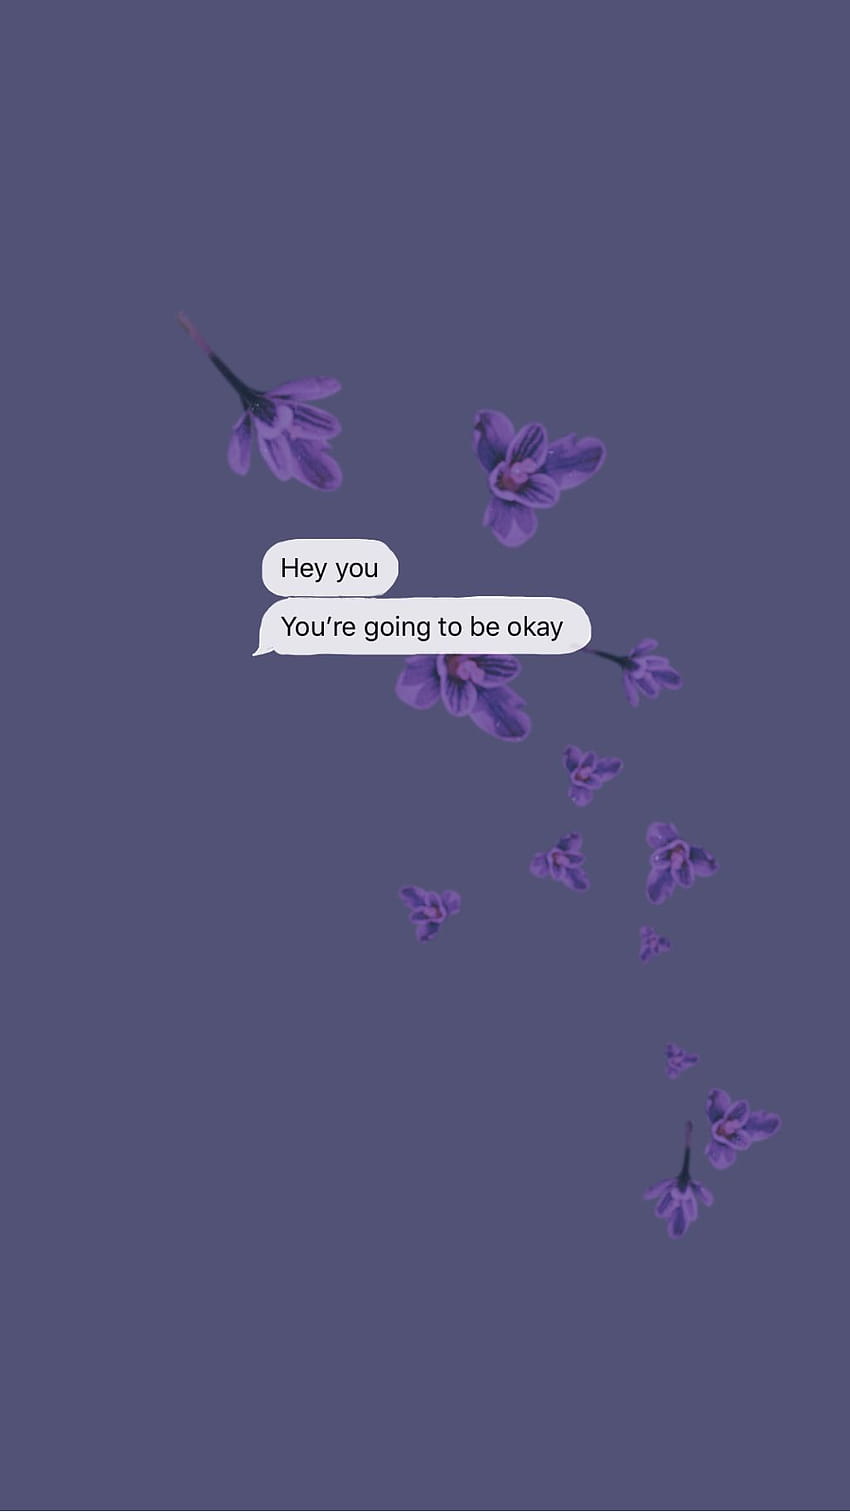 A purple phone background with a chat bubble that says 